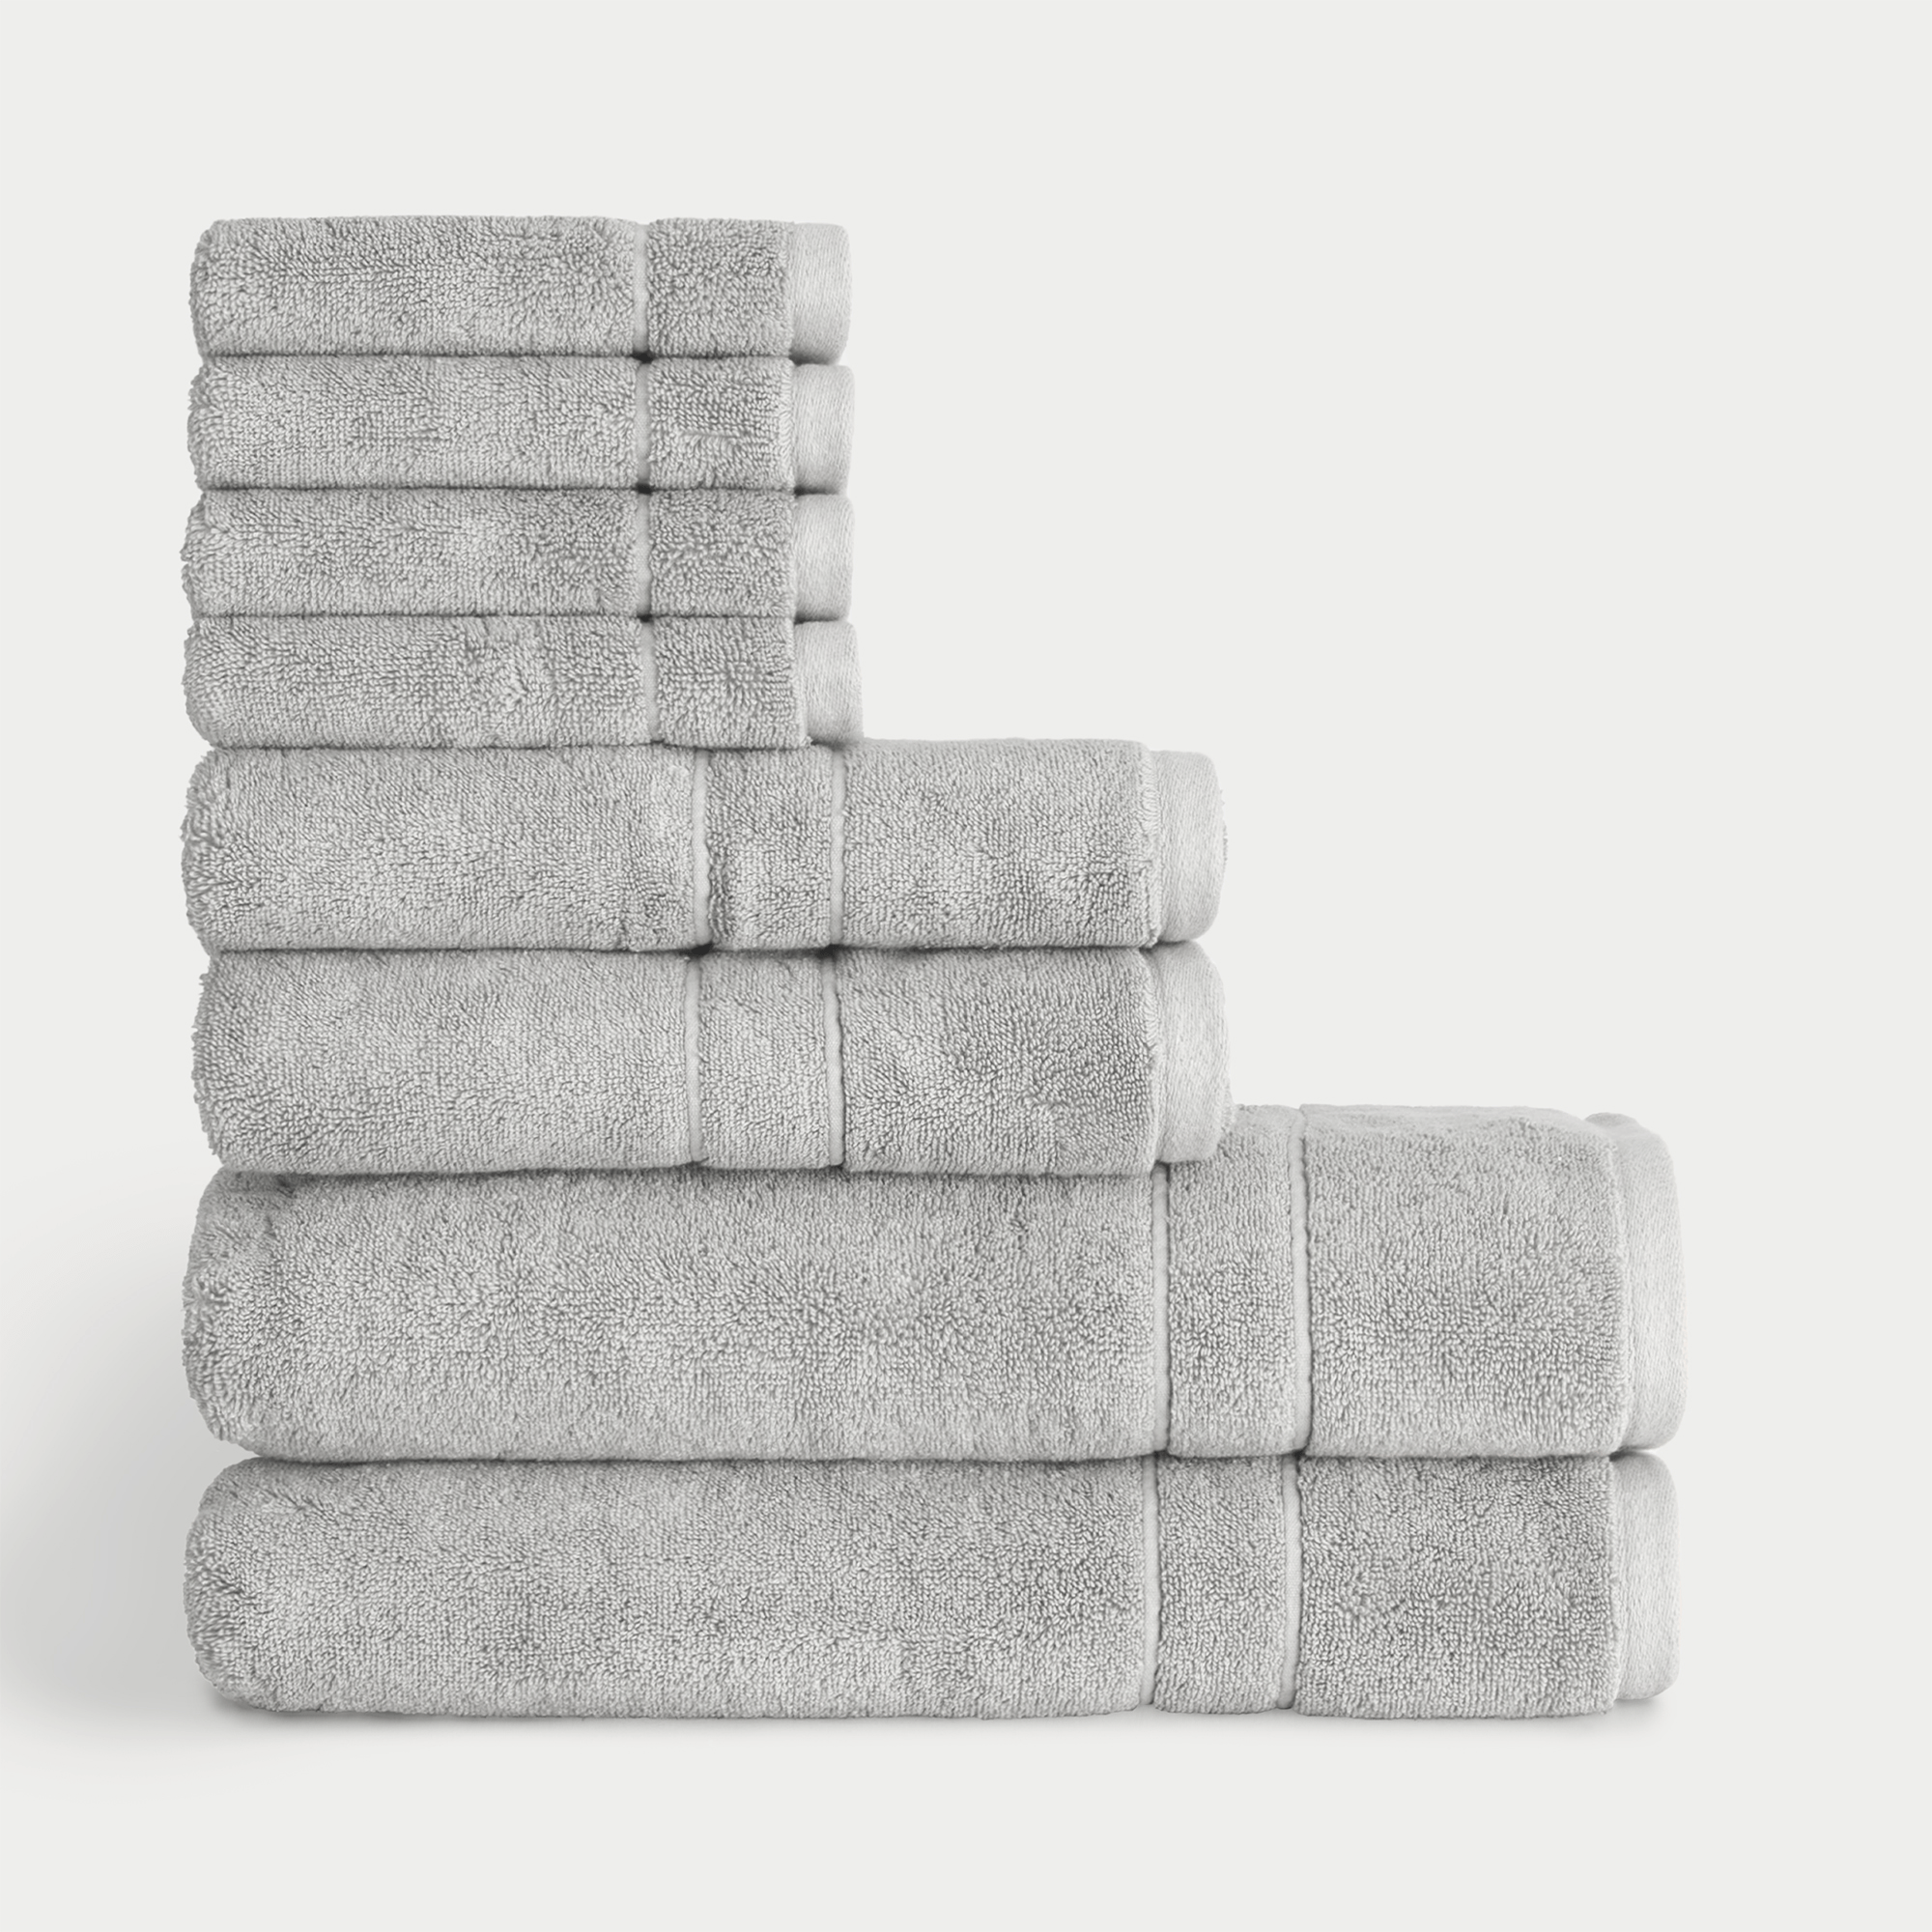 Premium Plush Bath Towel Set in the color Light Grey. Photo of Premium Plush Bath Towel Set taken with white background |Color:Light Grey